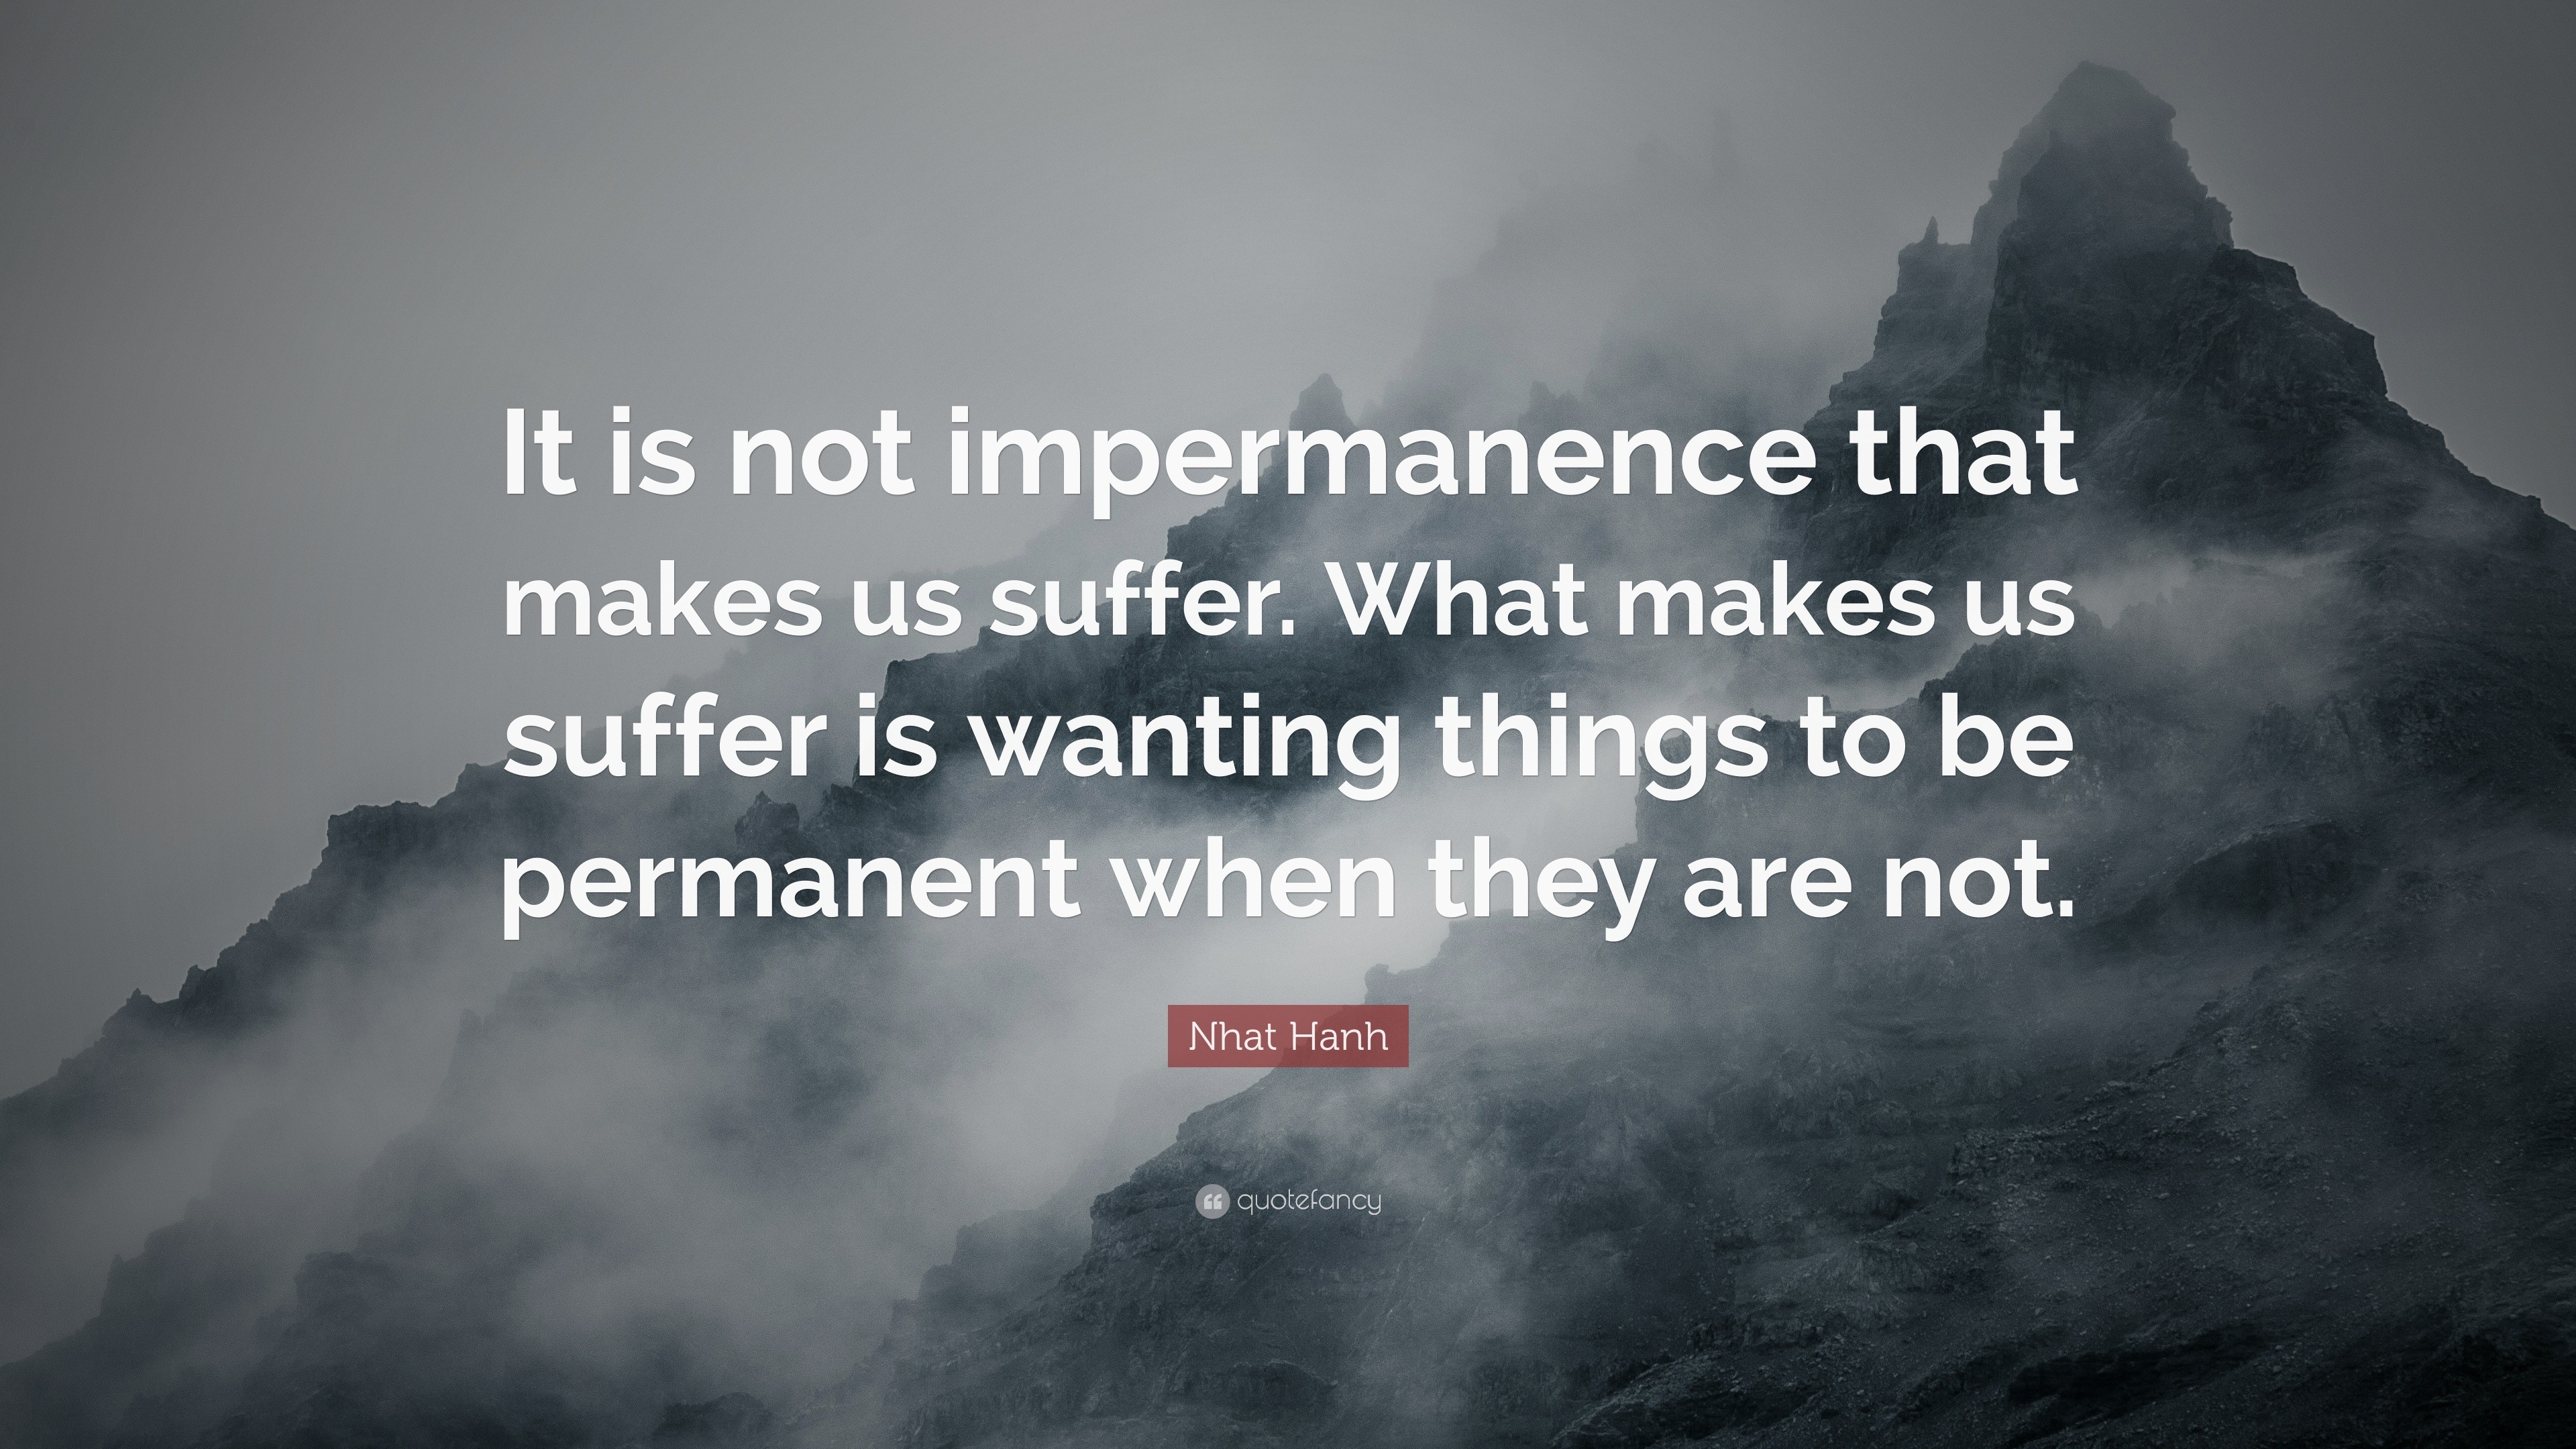 Nhat Hanh Quote: “It is not impermanence that makes us suffer. What